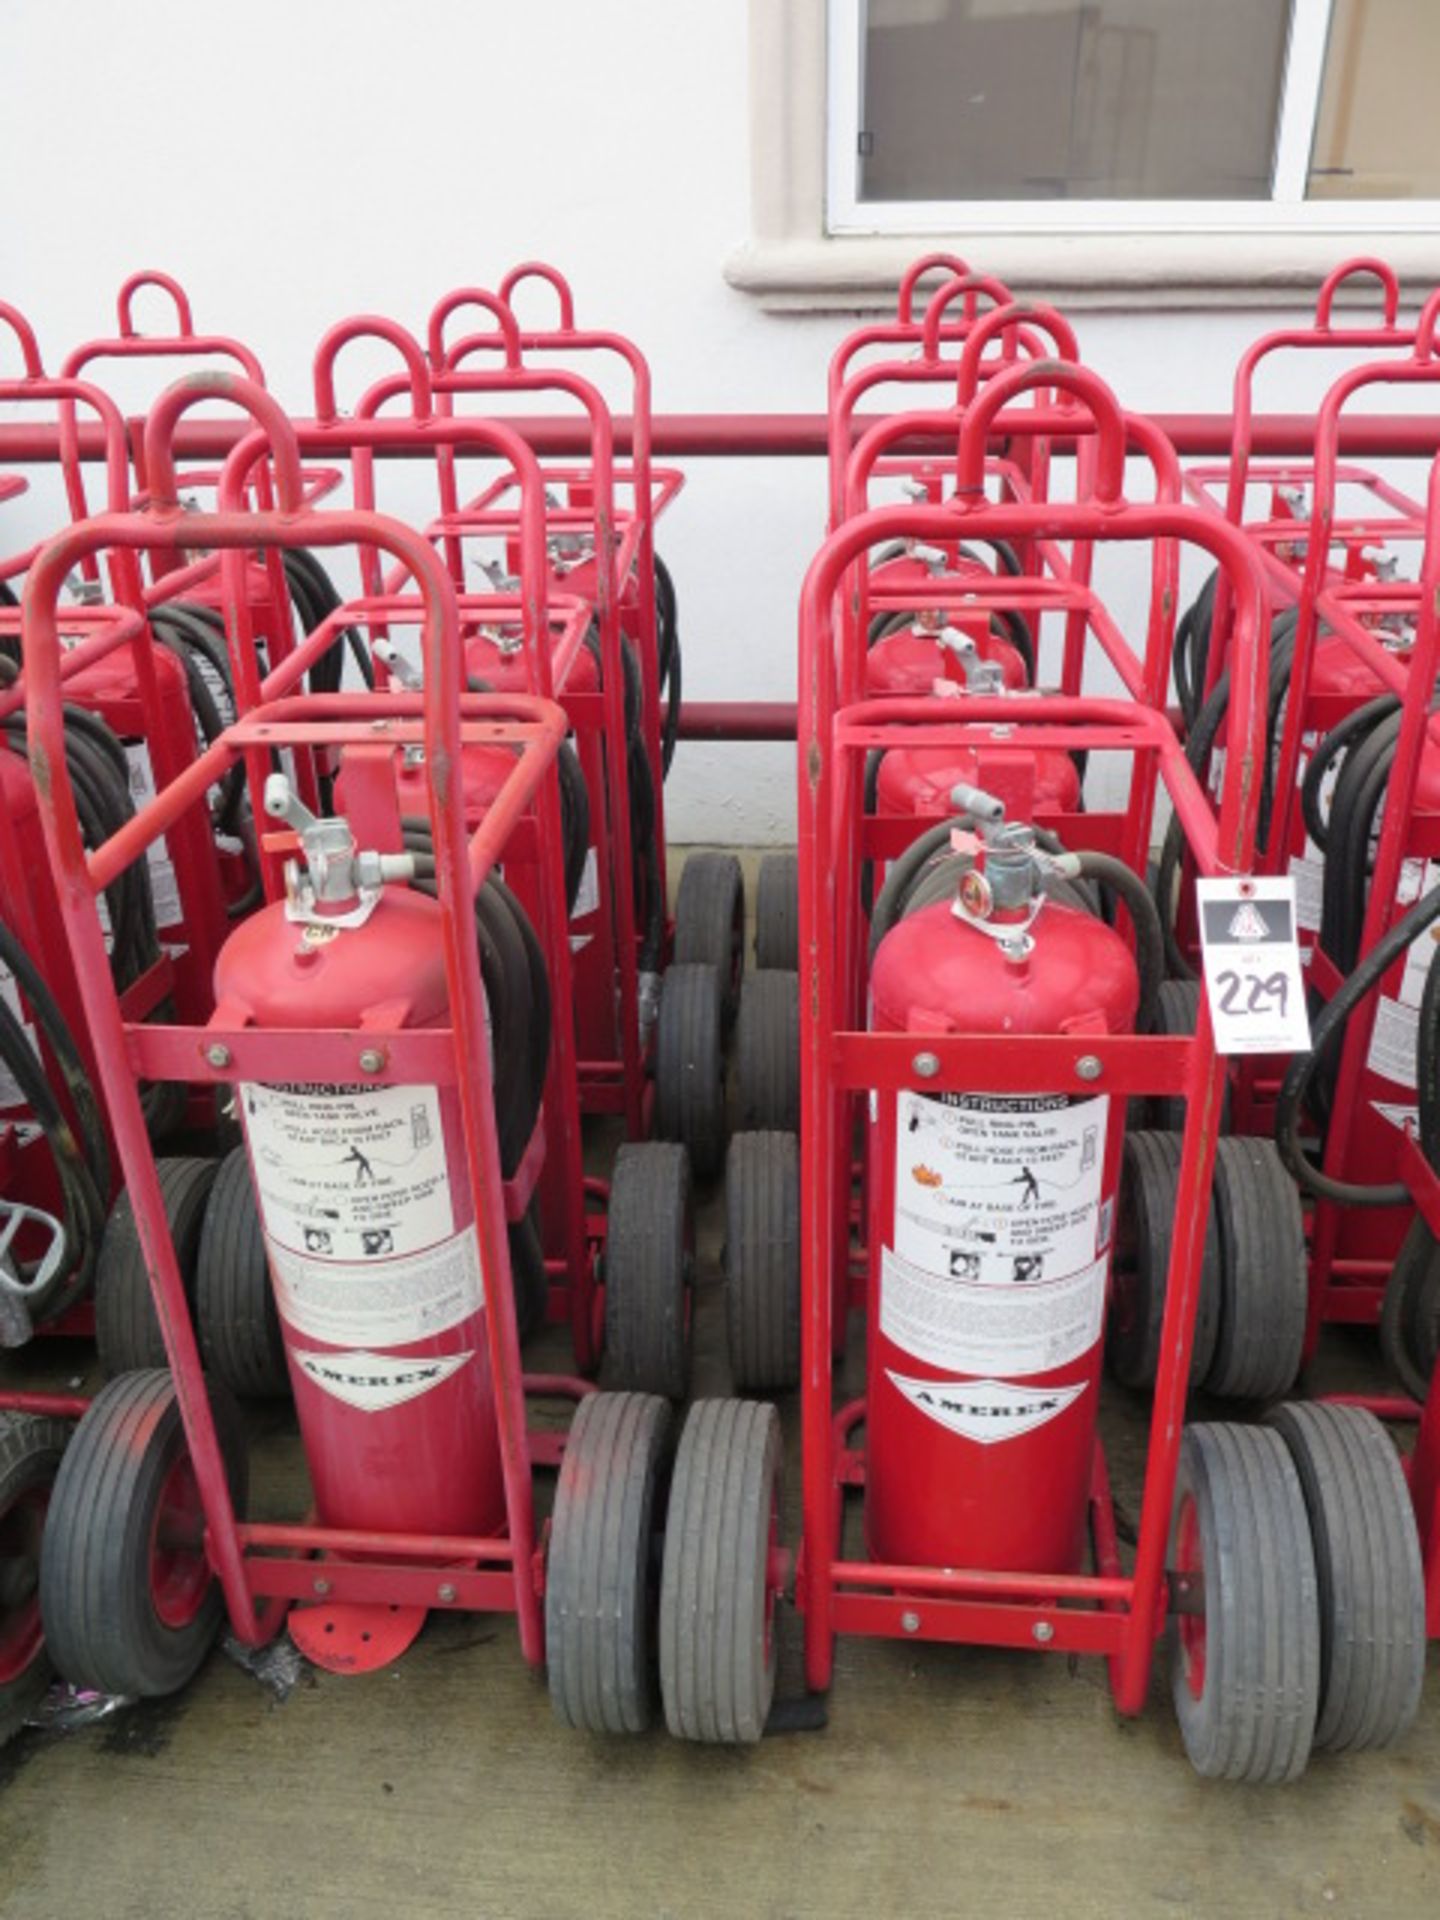 B & C Level Industrial Fire Extinguishers